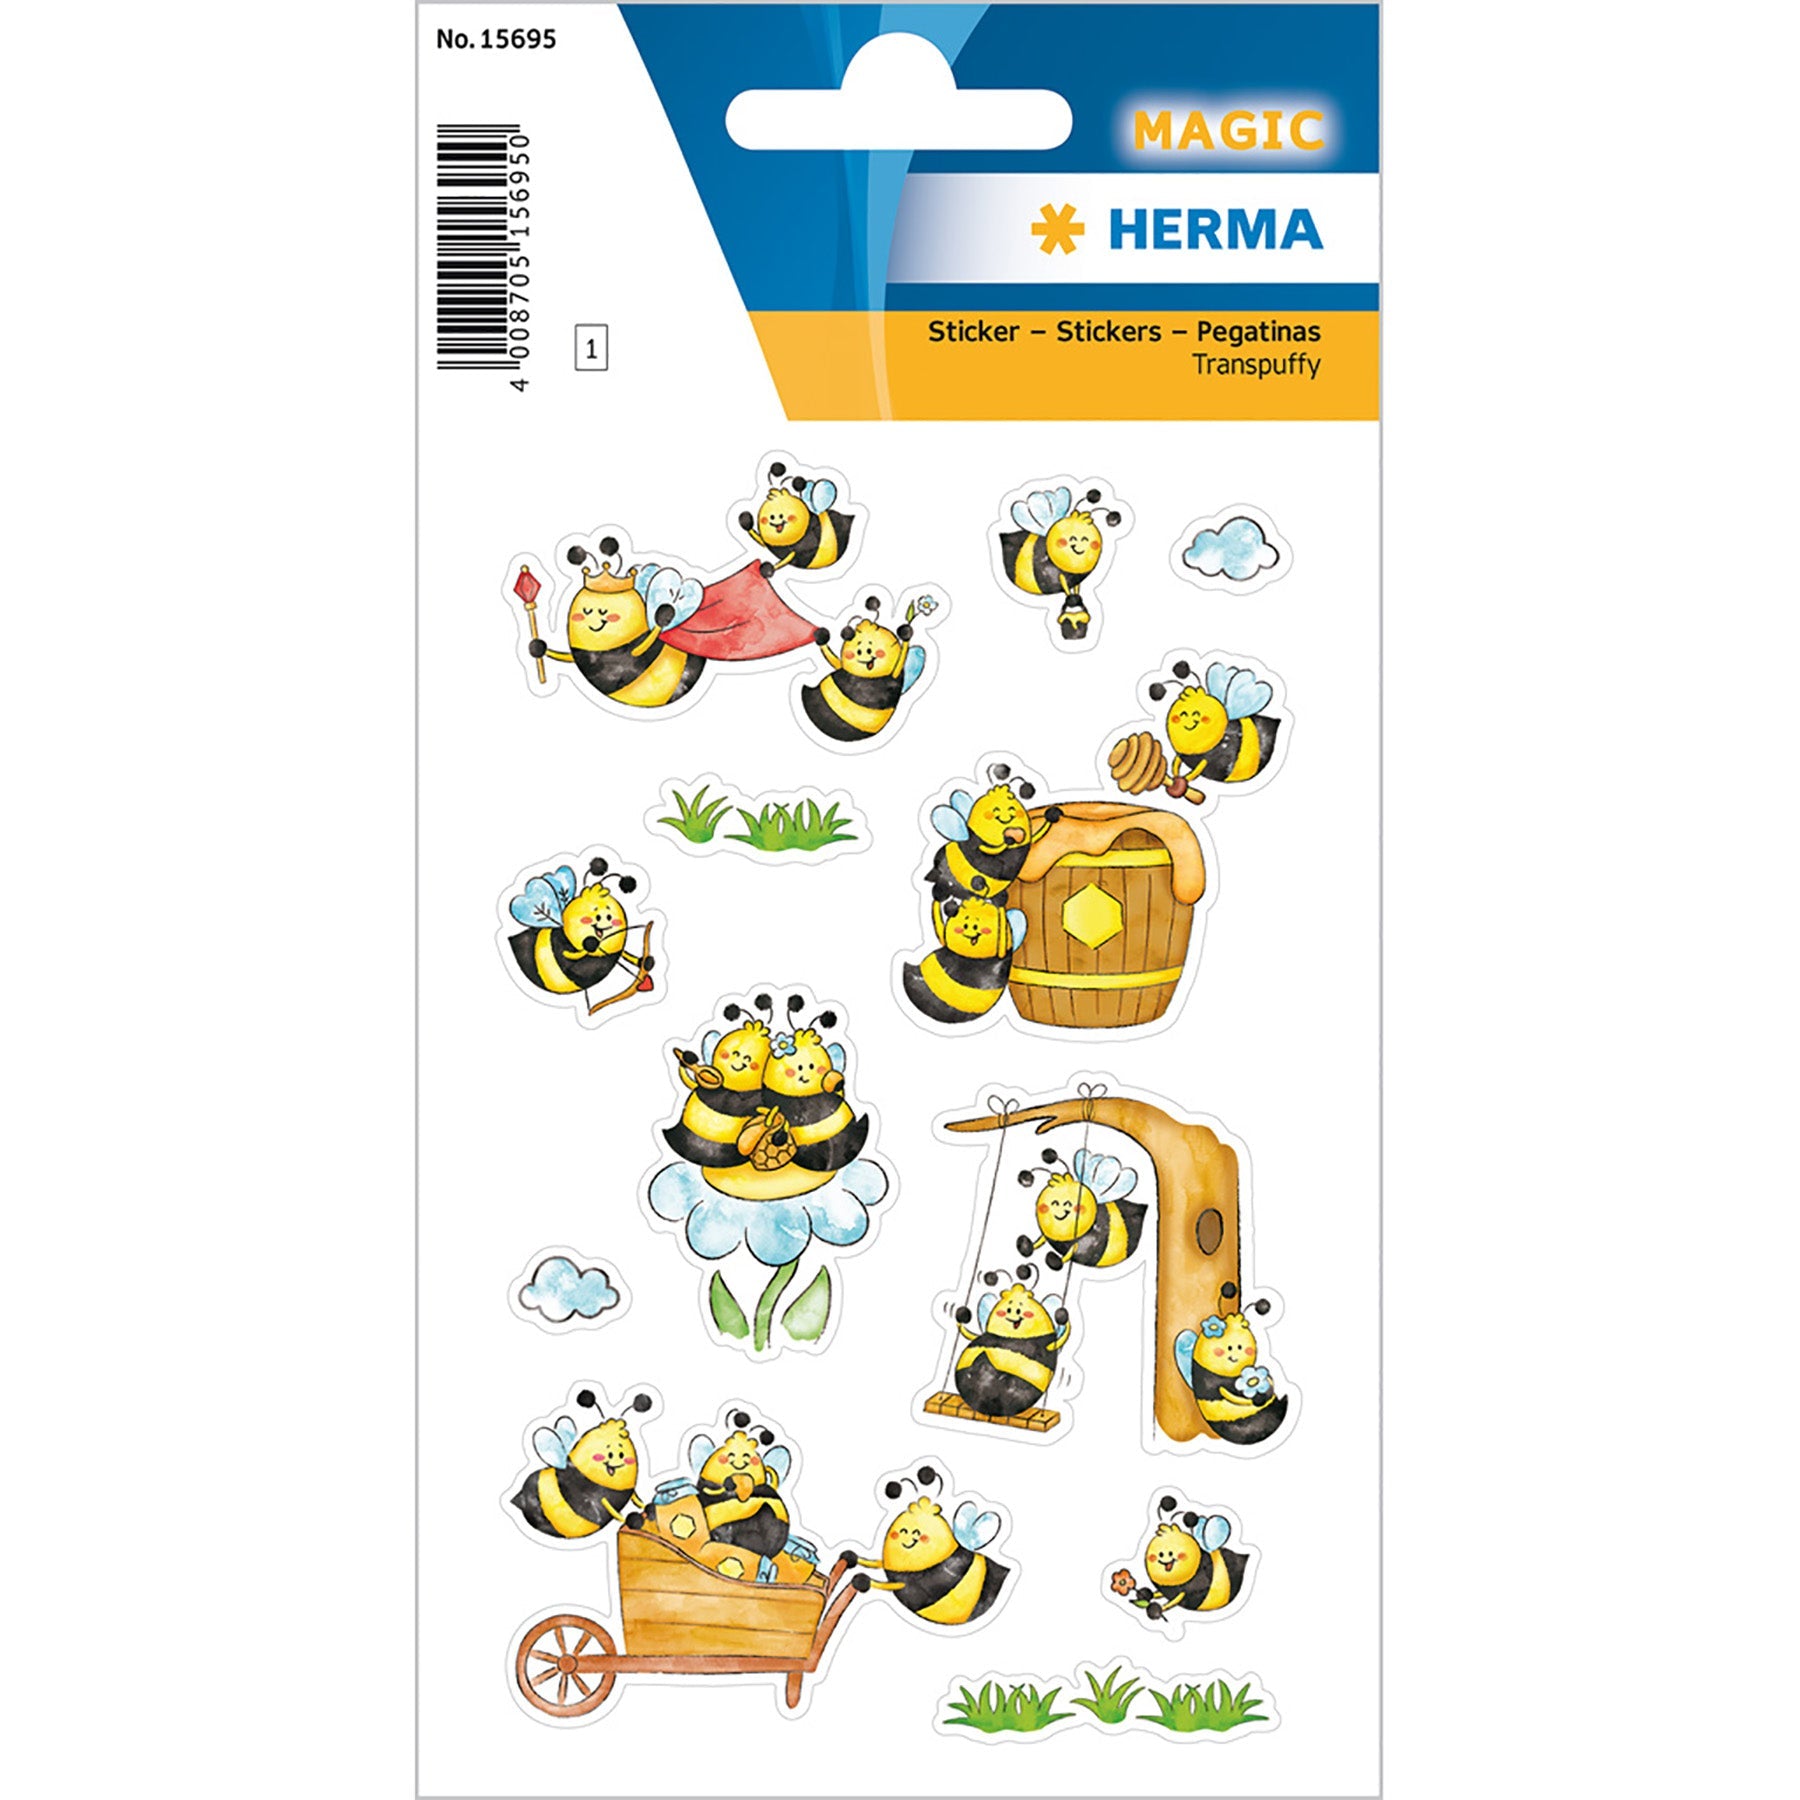 Herma Magic Stickers Bee Colony Transpuffy 4.75x3.1in Sheet